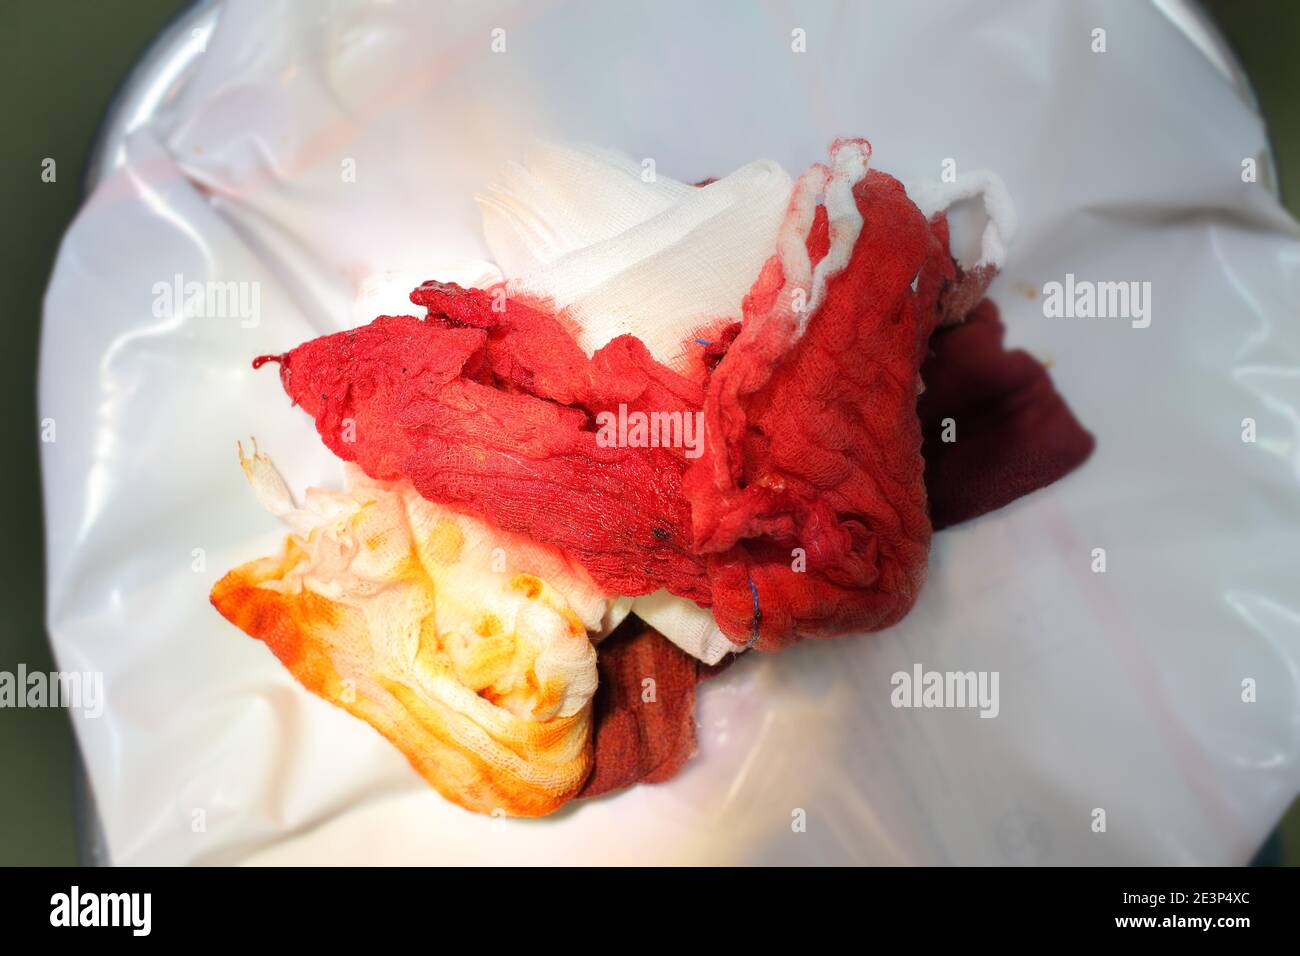 Blood-stained bandage in the hospital garbage disposal bin. Stock Photo